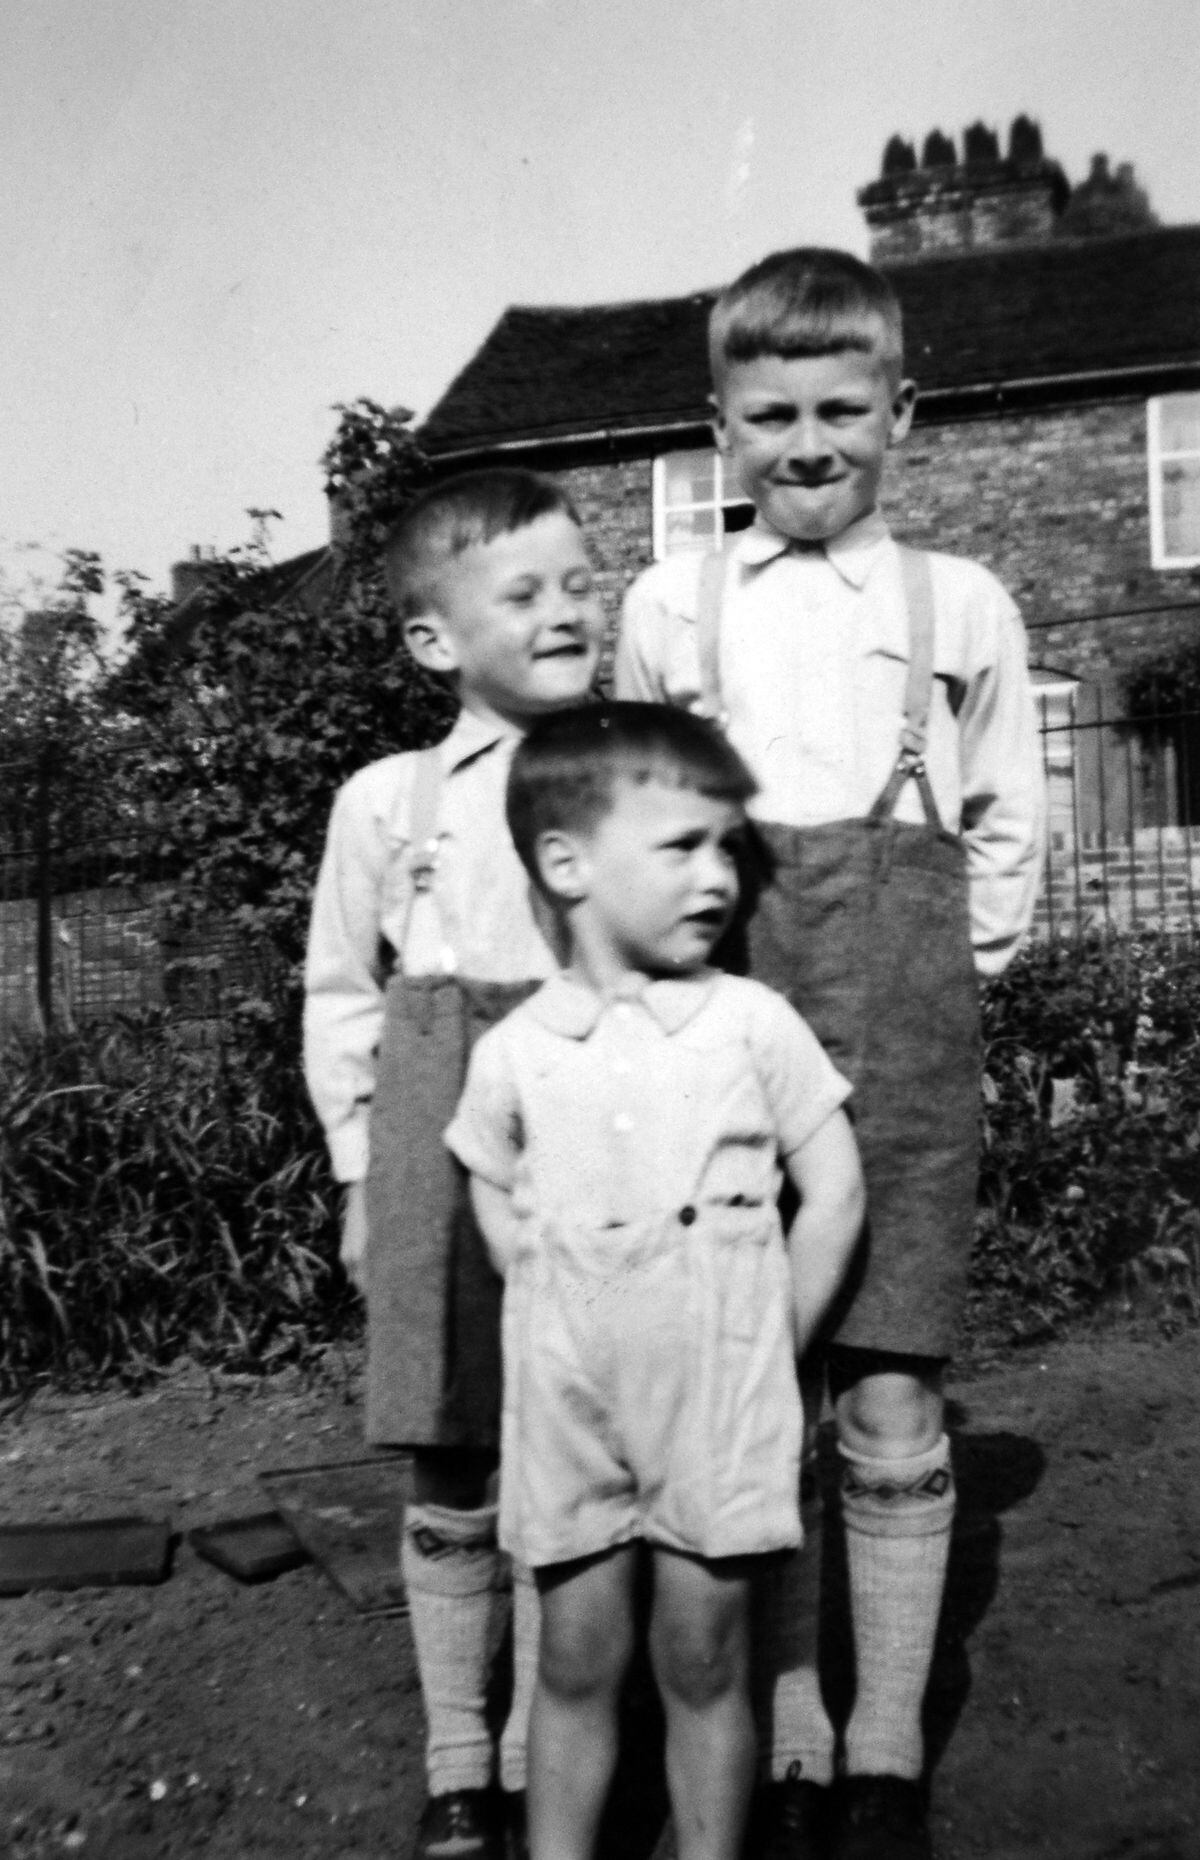 Young Alan, front, with his brothers Arthur and Ted outside their home in Carpenters Row, Coalbrookdale – a row which was condemned, but ironically is now a cherished heritage asset for the Ironbridge Gorge.